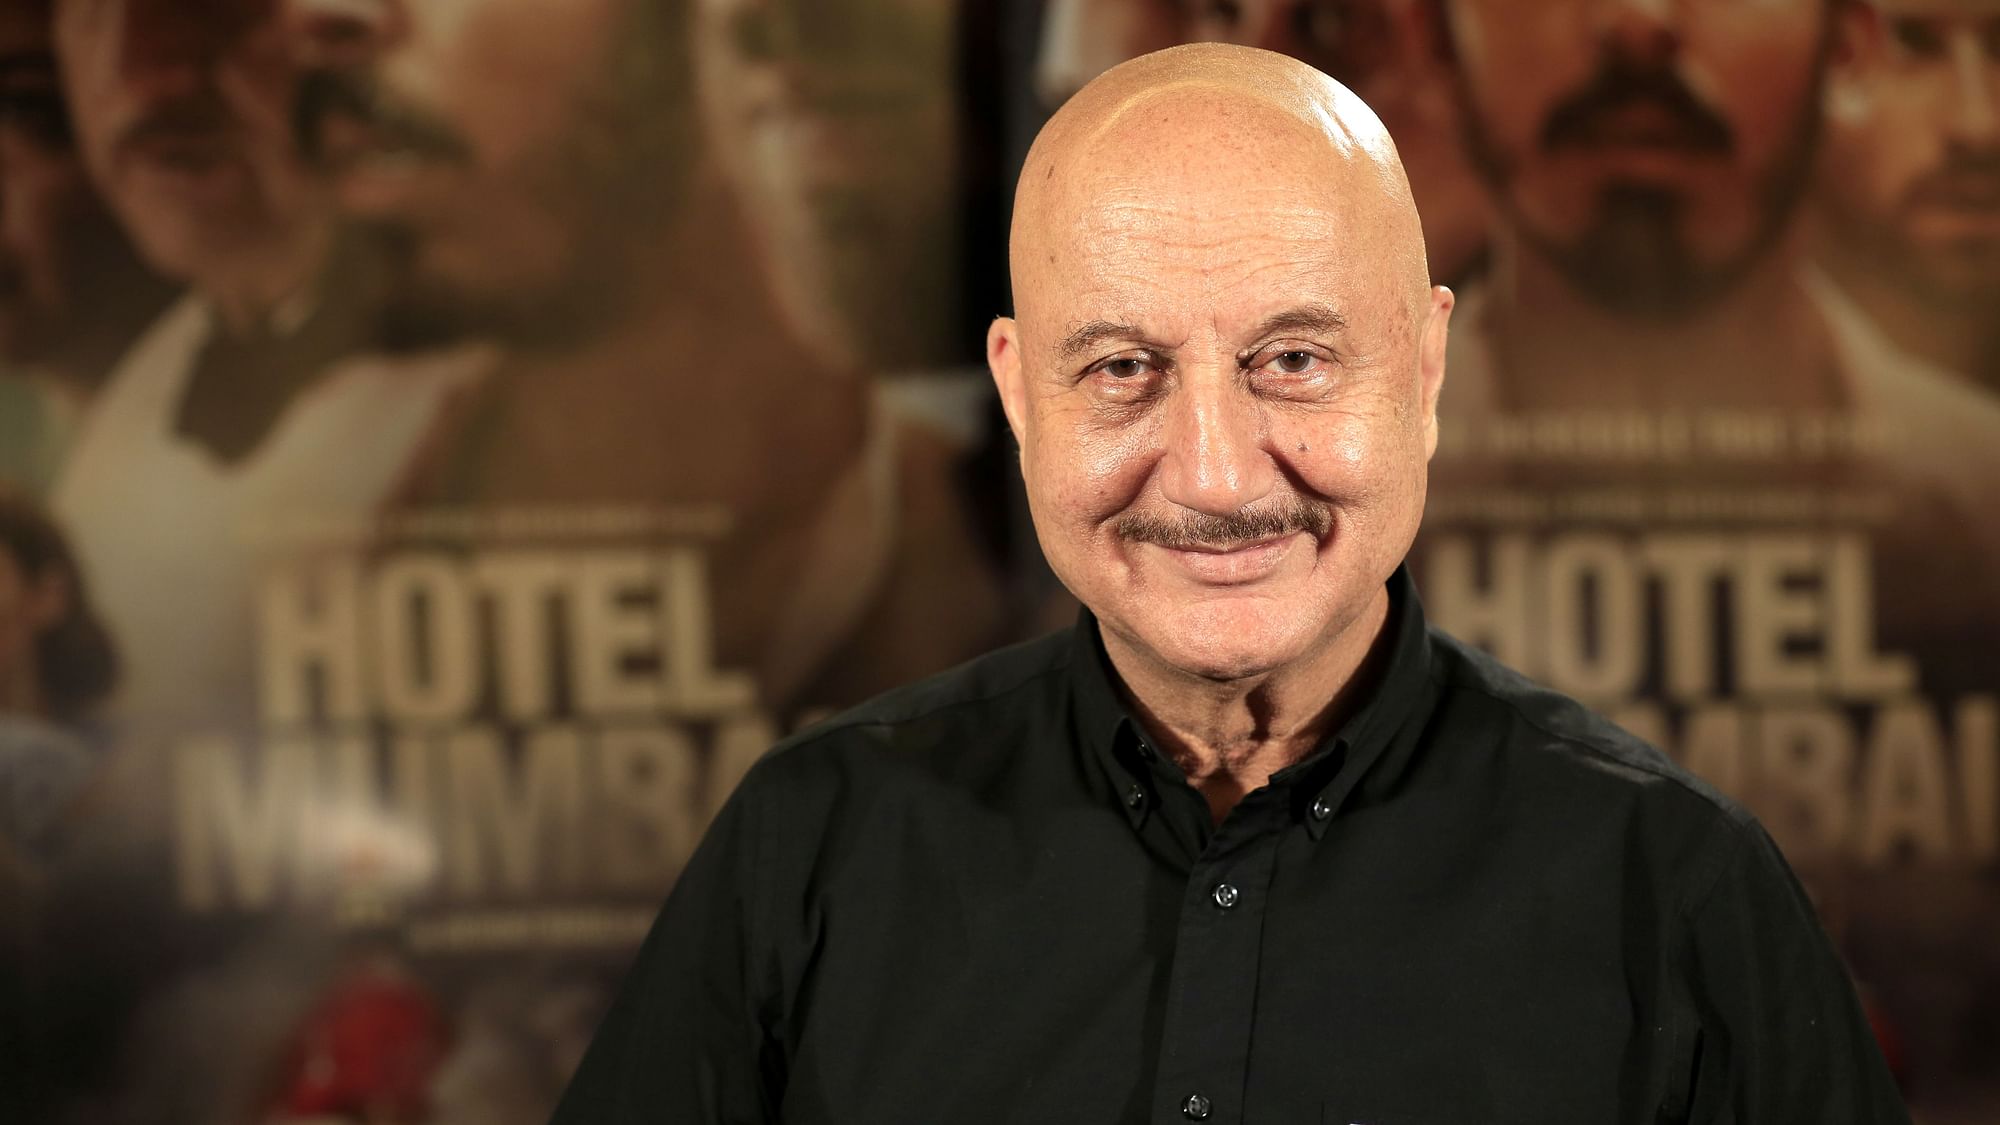 Anupam Kher talks about how the Hindi film industry has changed.